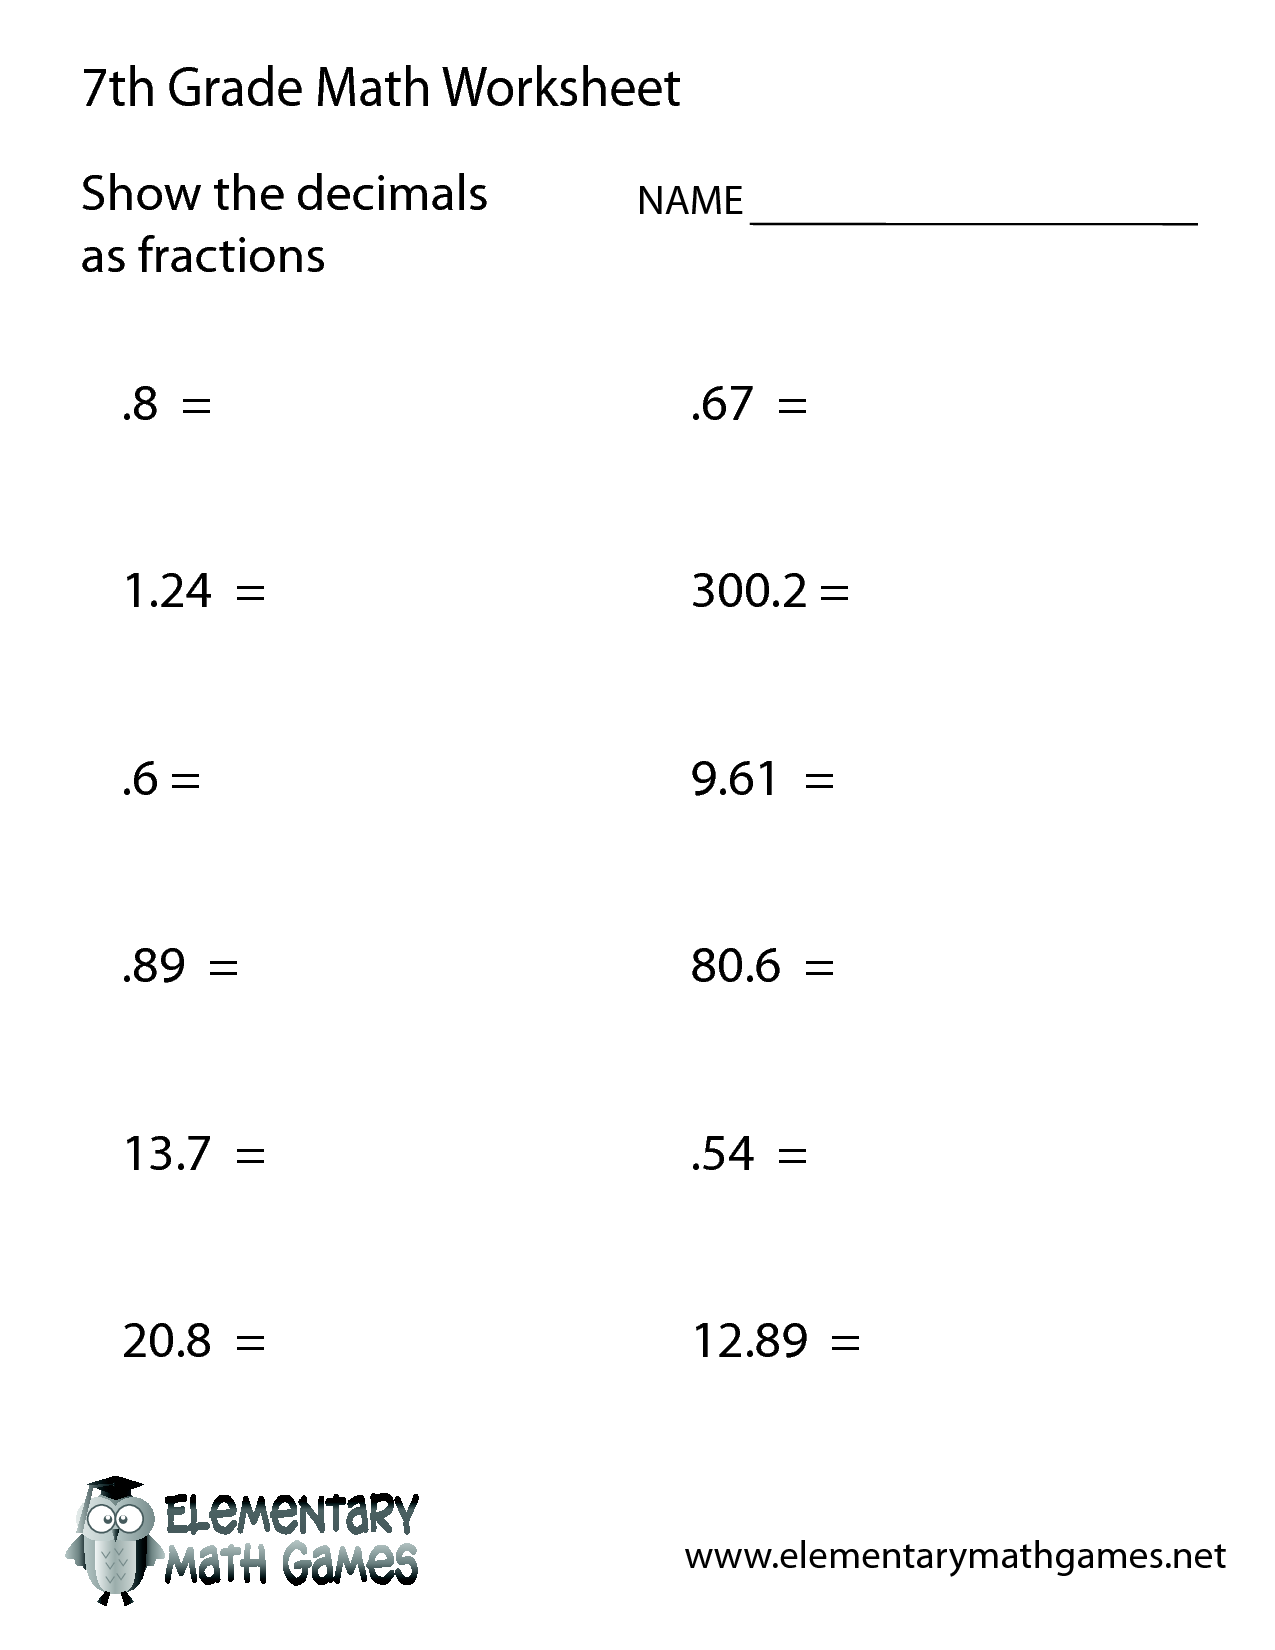 10 Best Images Of 7th Grade Math Worksheets With Answer Key 7th Grade Math Worksheets Algebra 